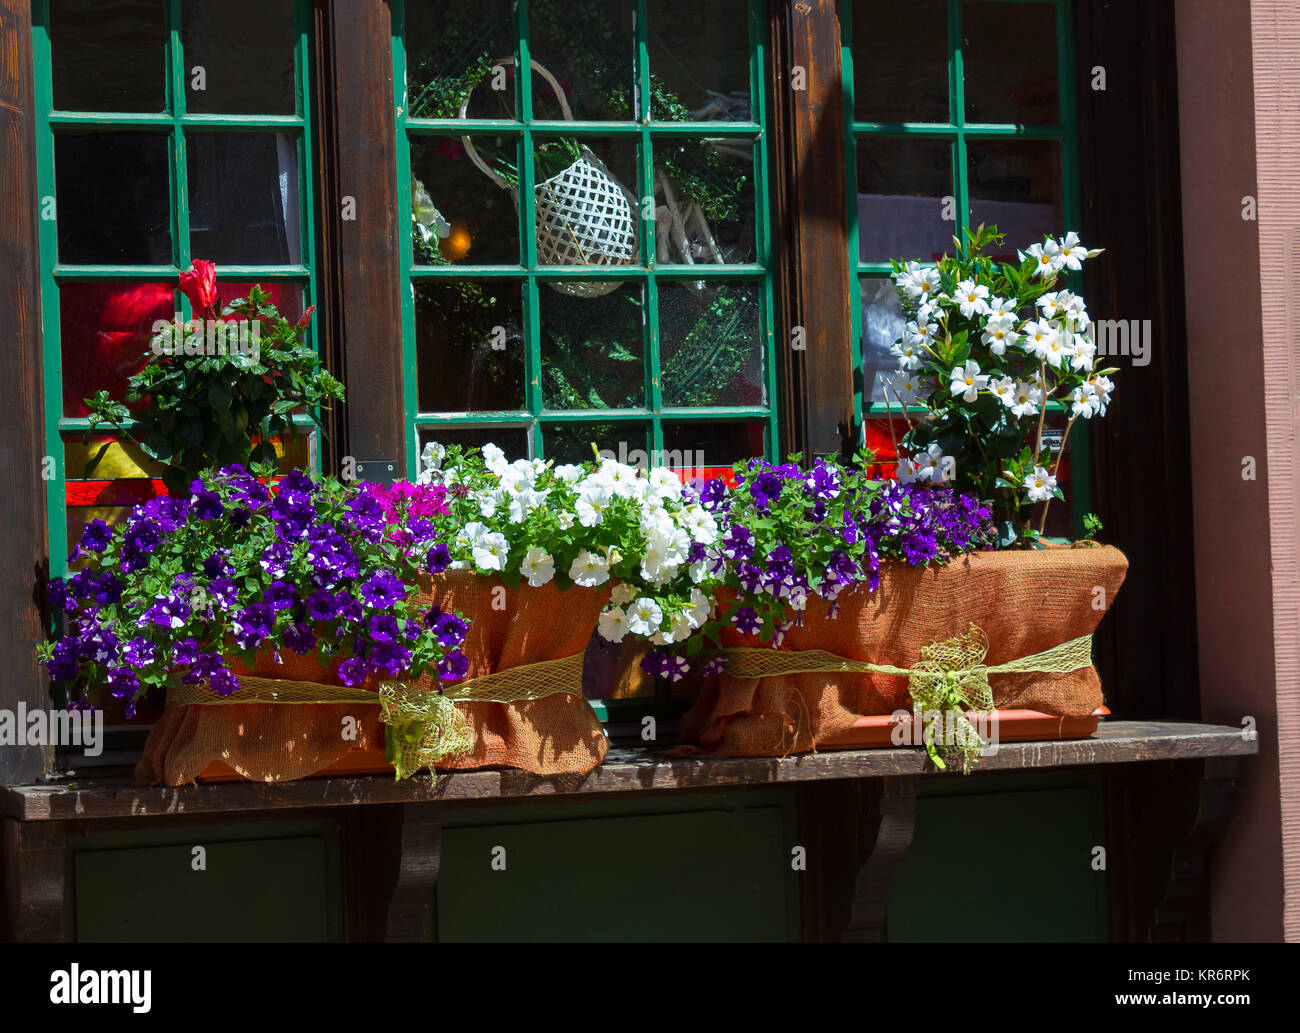 Window decorated with flowers Stock Photo